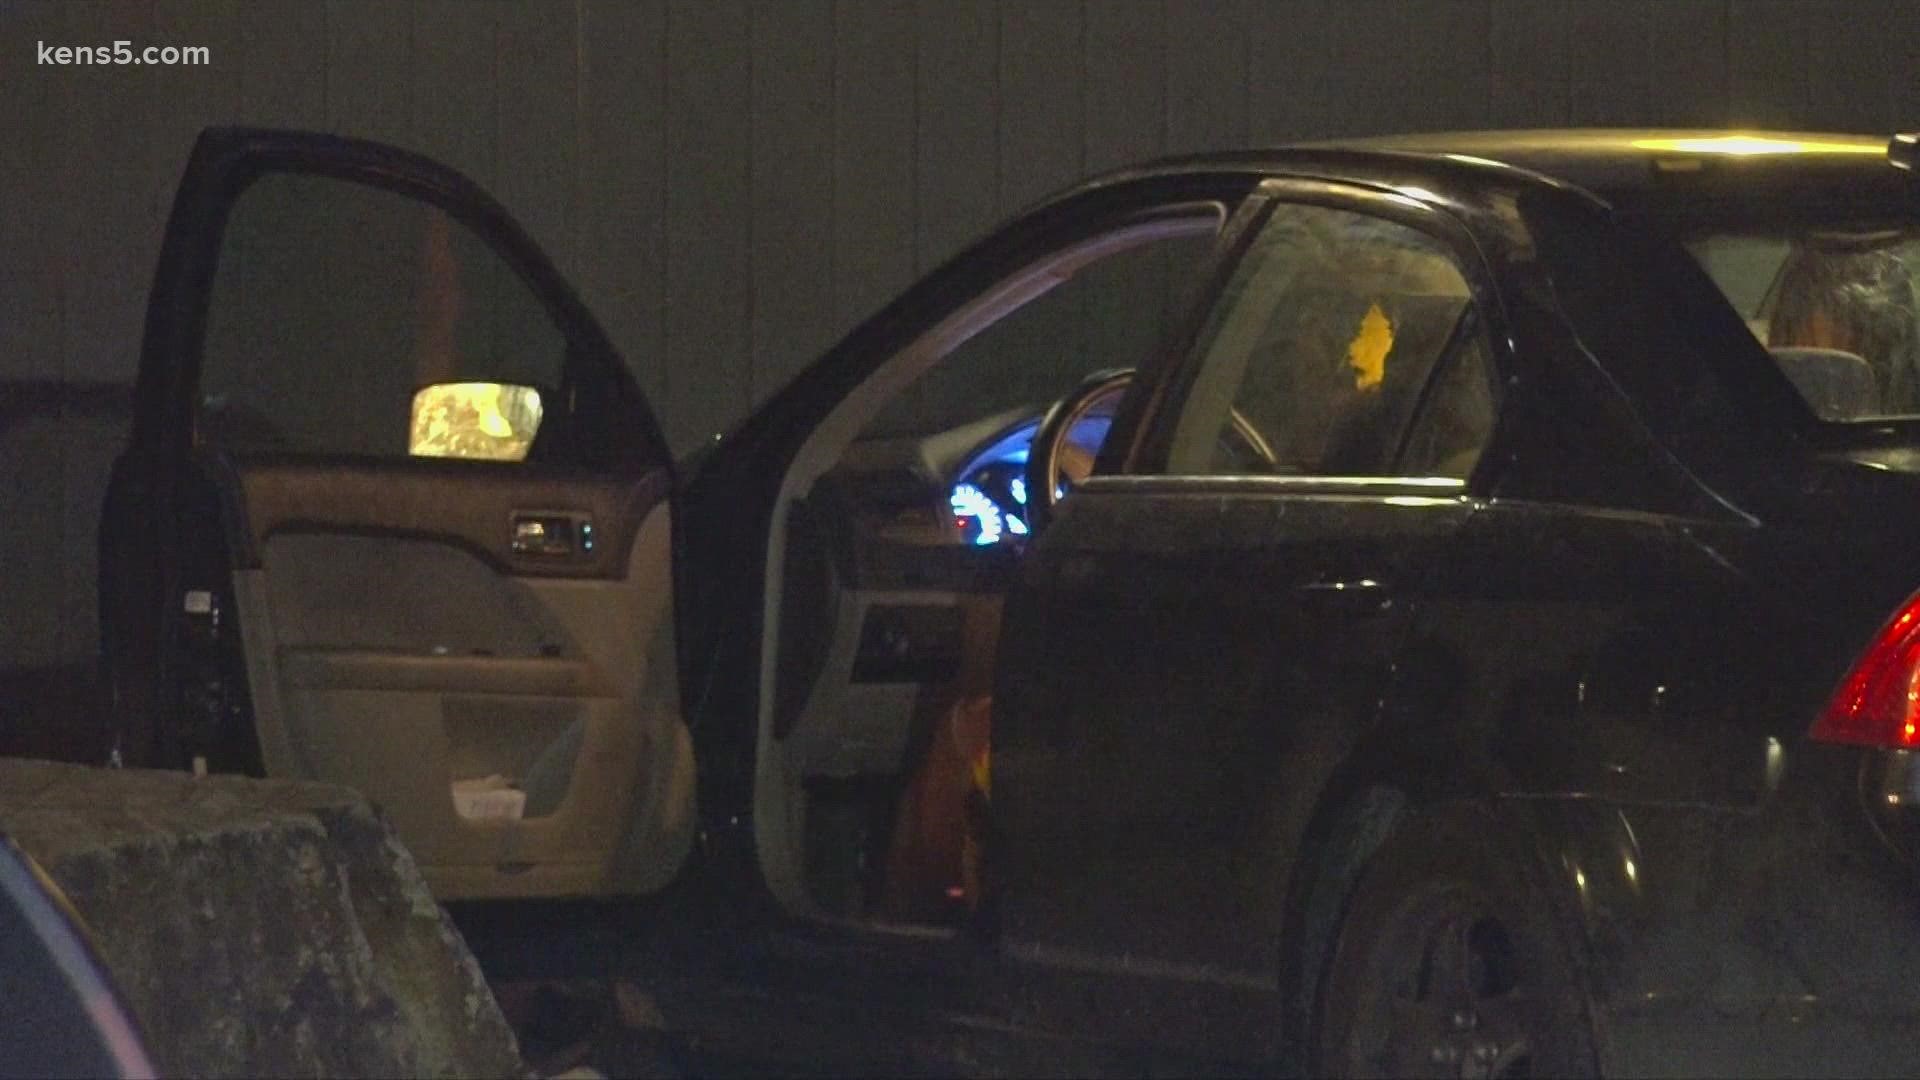 Police say the two toddlers were found in the vehicle sleeping in the backseat.